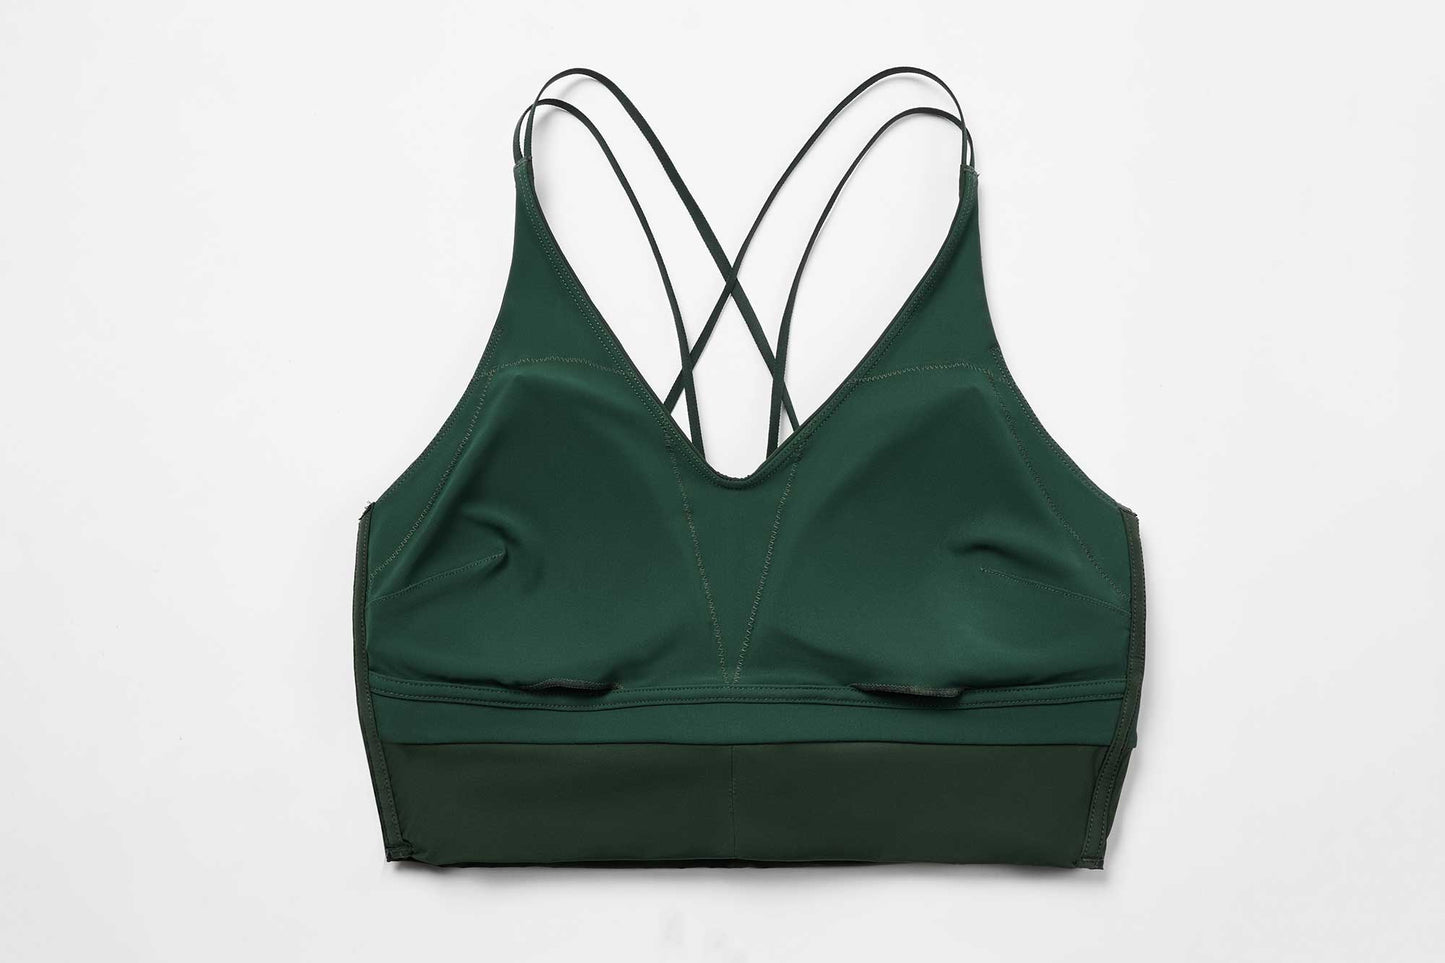 the inside look of the green sports bra, showing the pockets for the removable pads